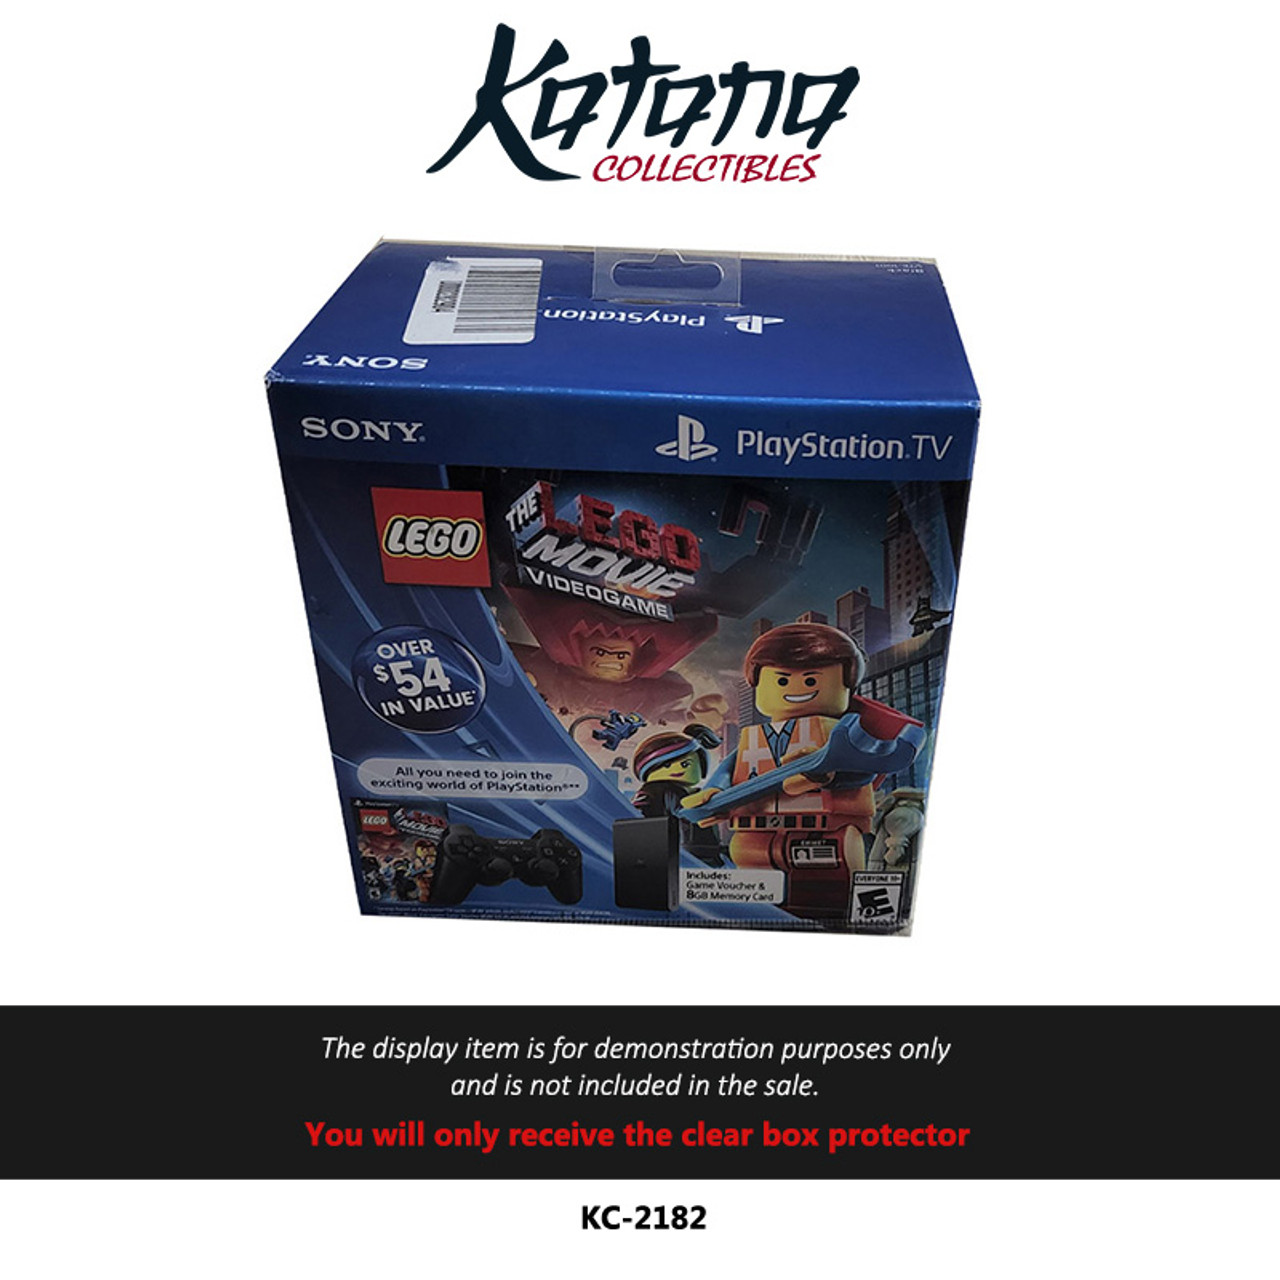 Katana Collectibles Protector For Sony Playstation TV The LEGO Movie Video Game